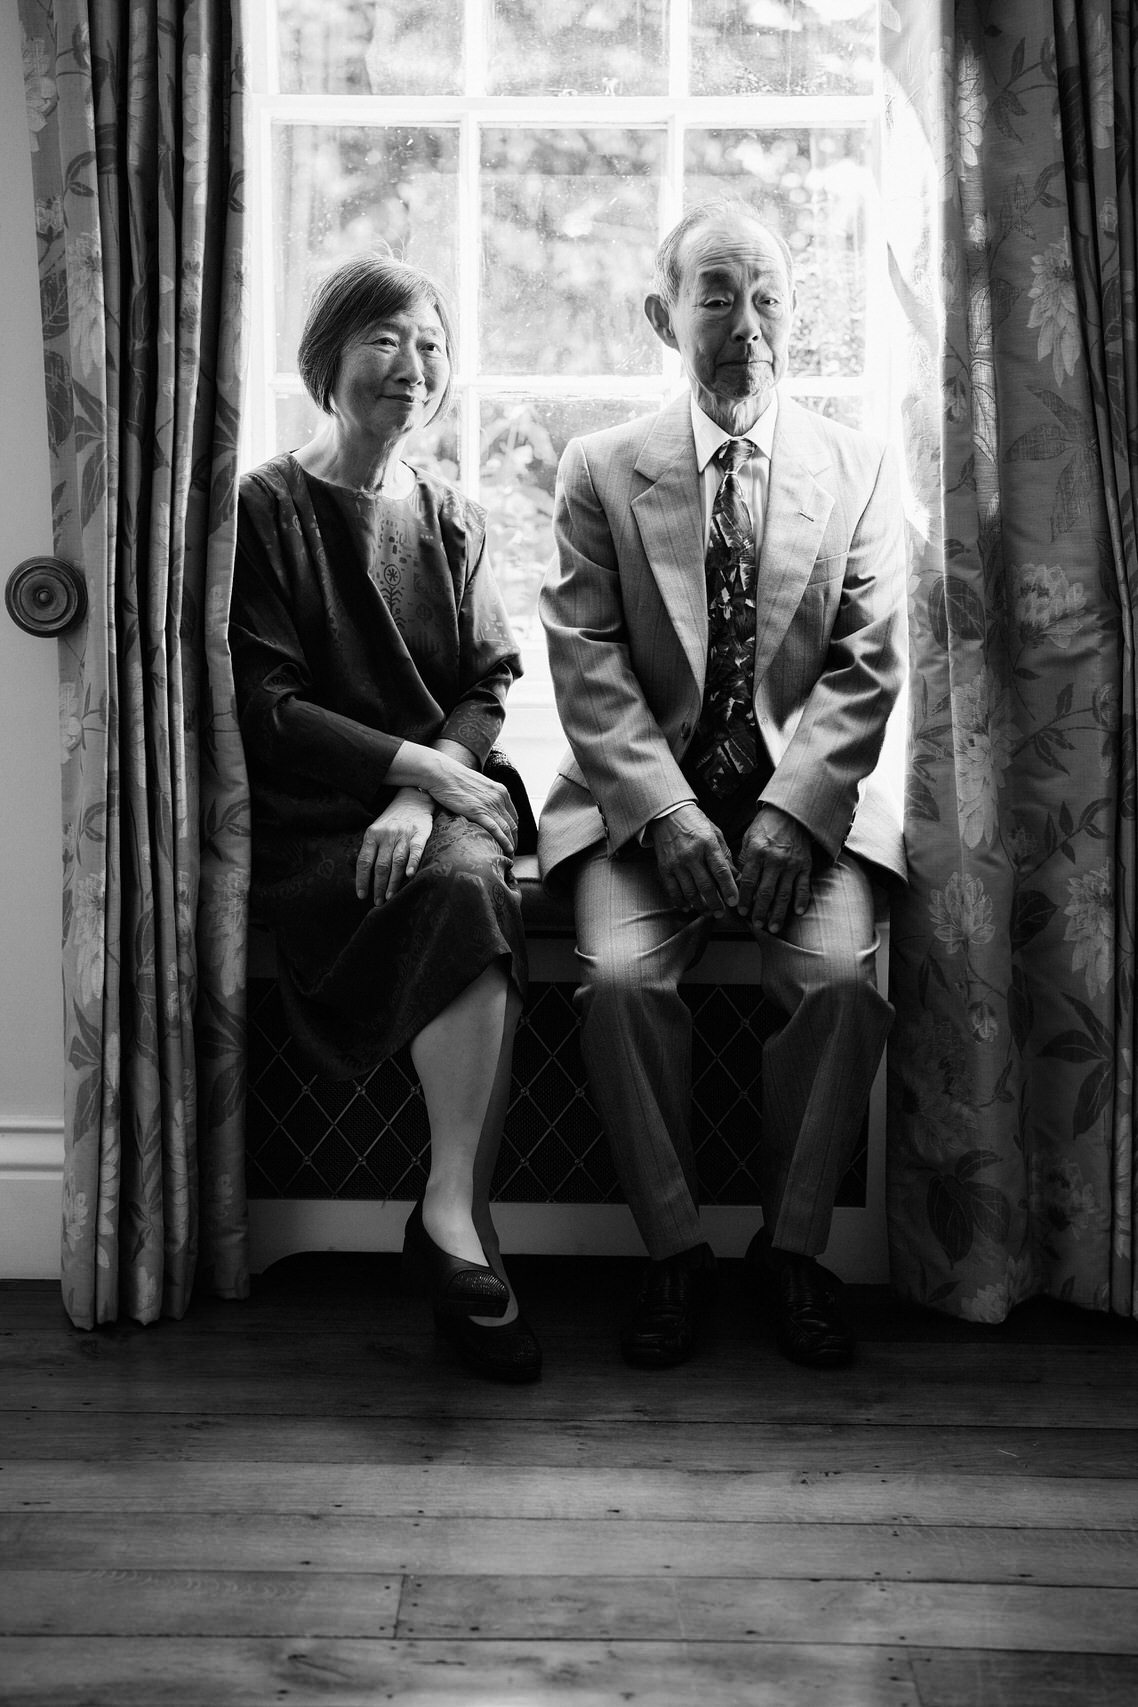 A picture in black and white of a couple sitting by a window.